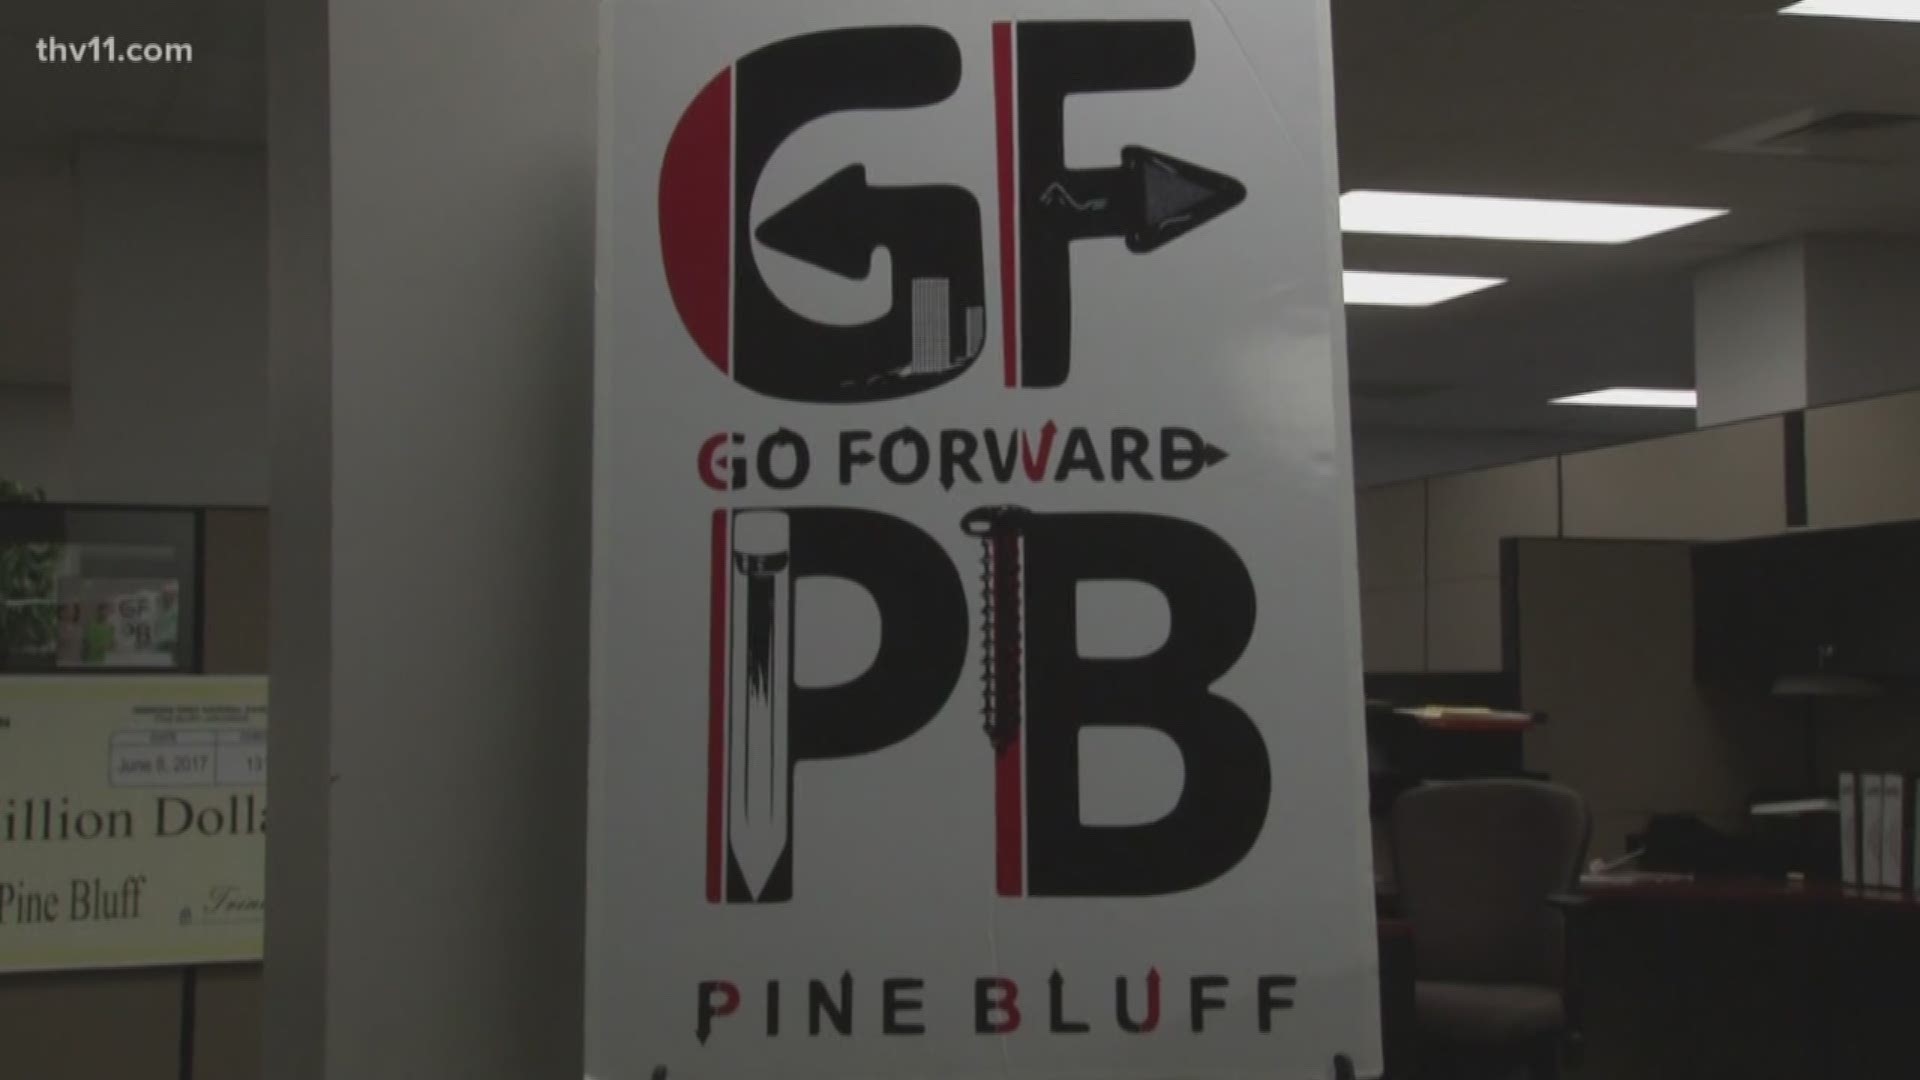 Day by day, it seems like something new is hitting the streets in Pine Bluff. According to the group 'Go Forward Pine Bluff,' there have been more investments on Main Street over the last two years than over the past two decades.